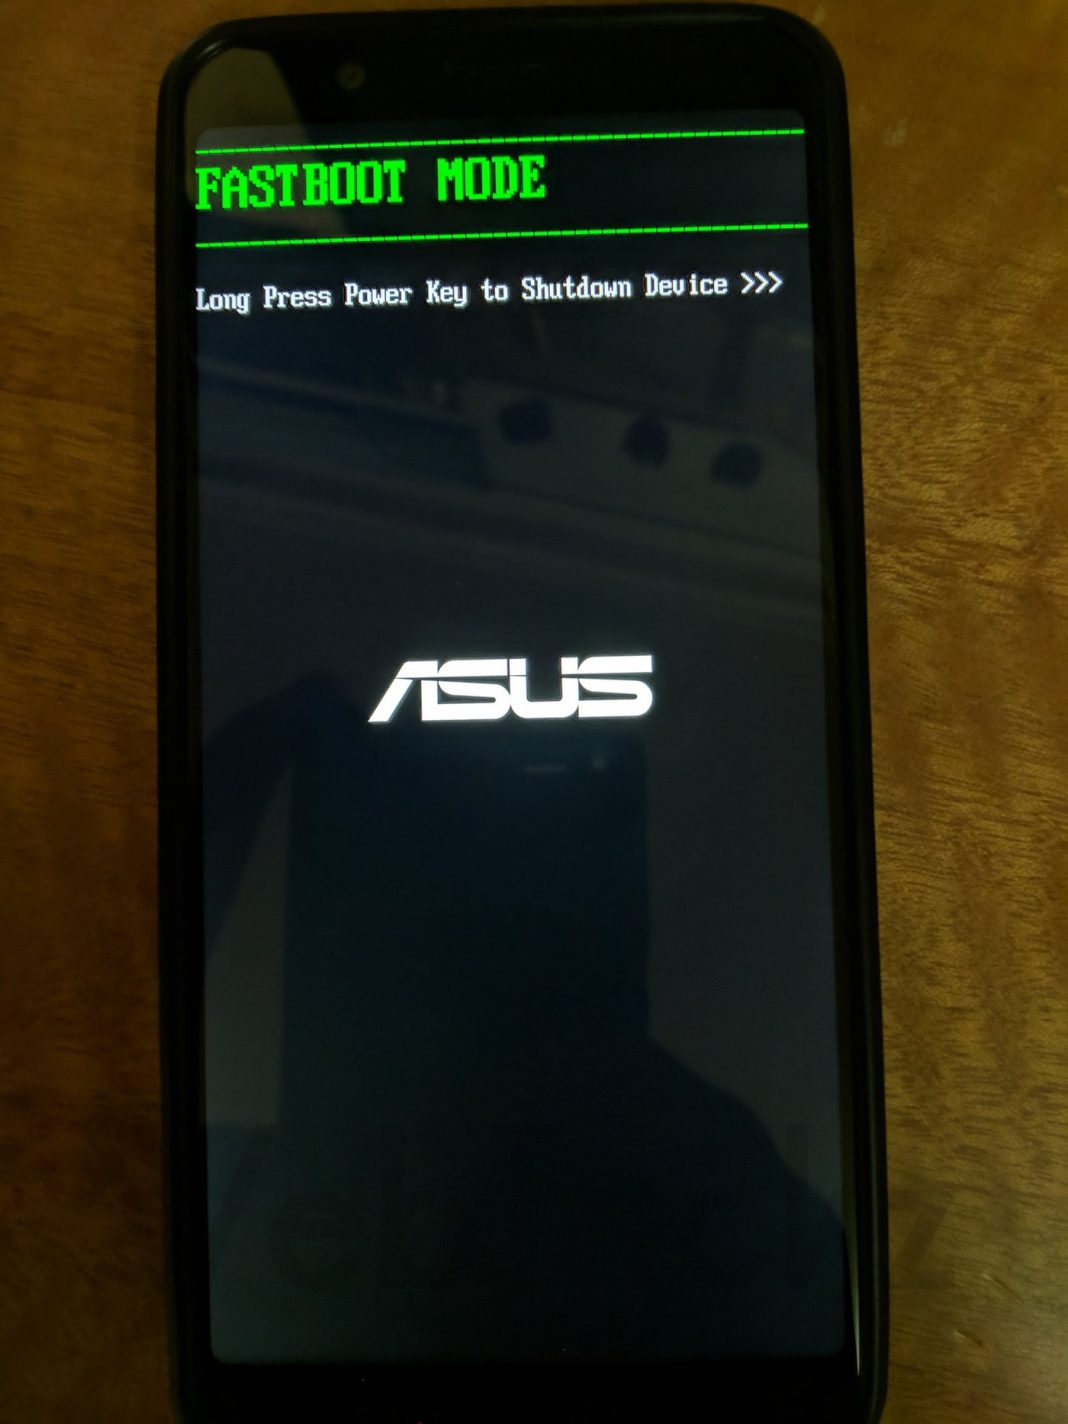 asus fastboot flash recovery